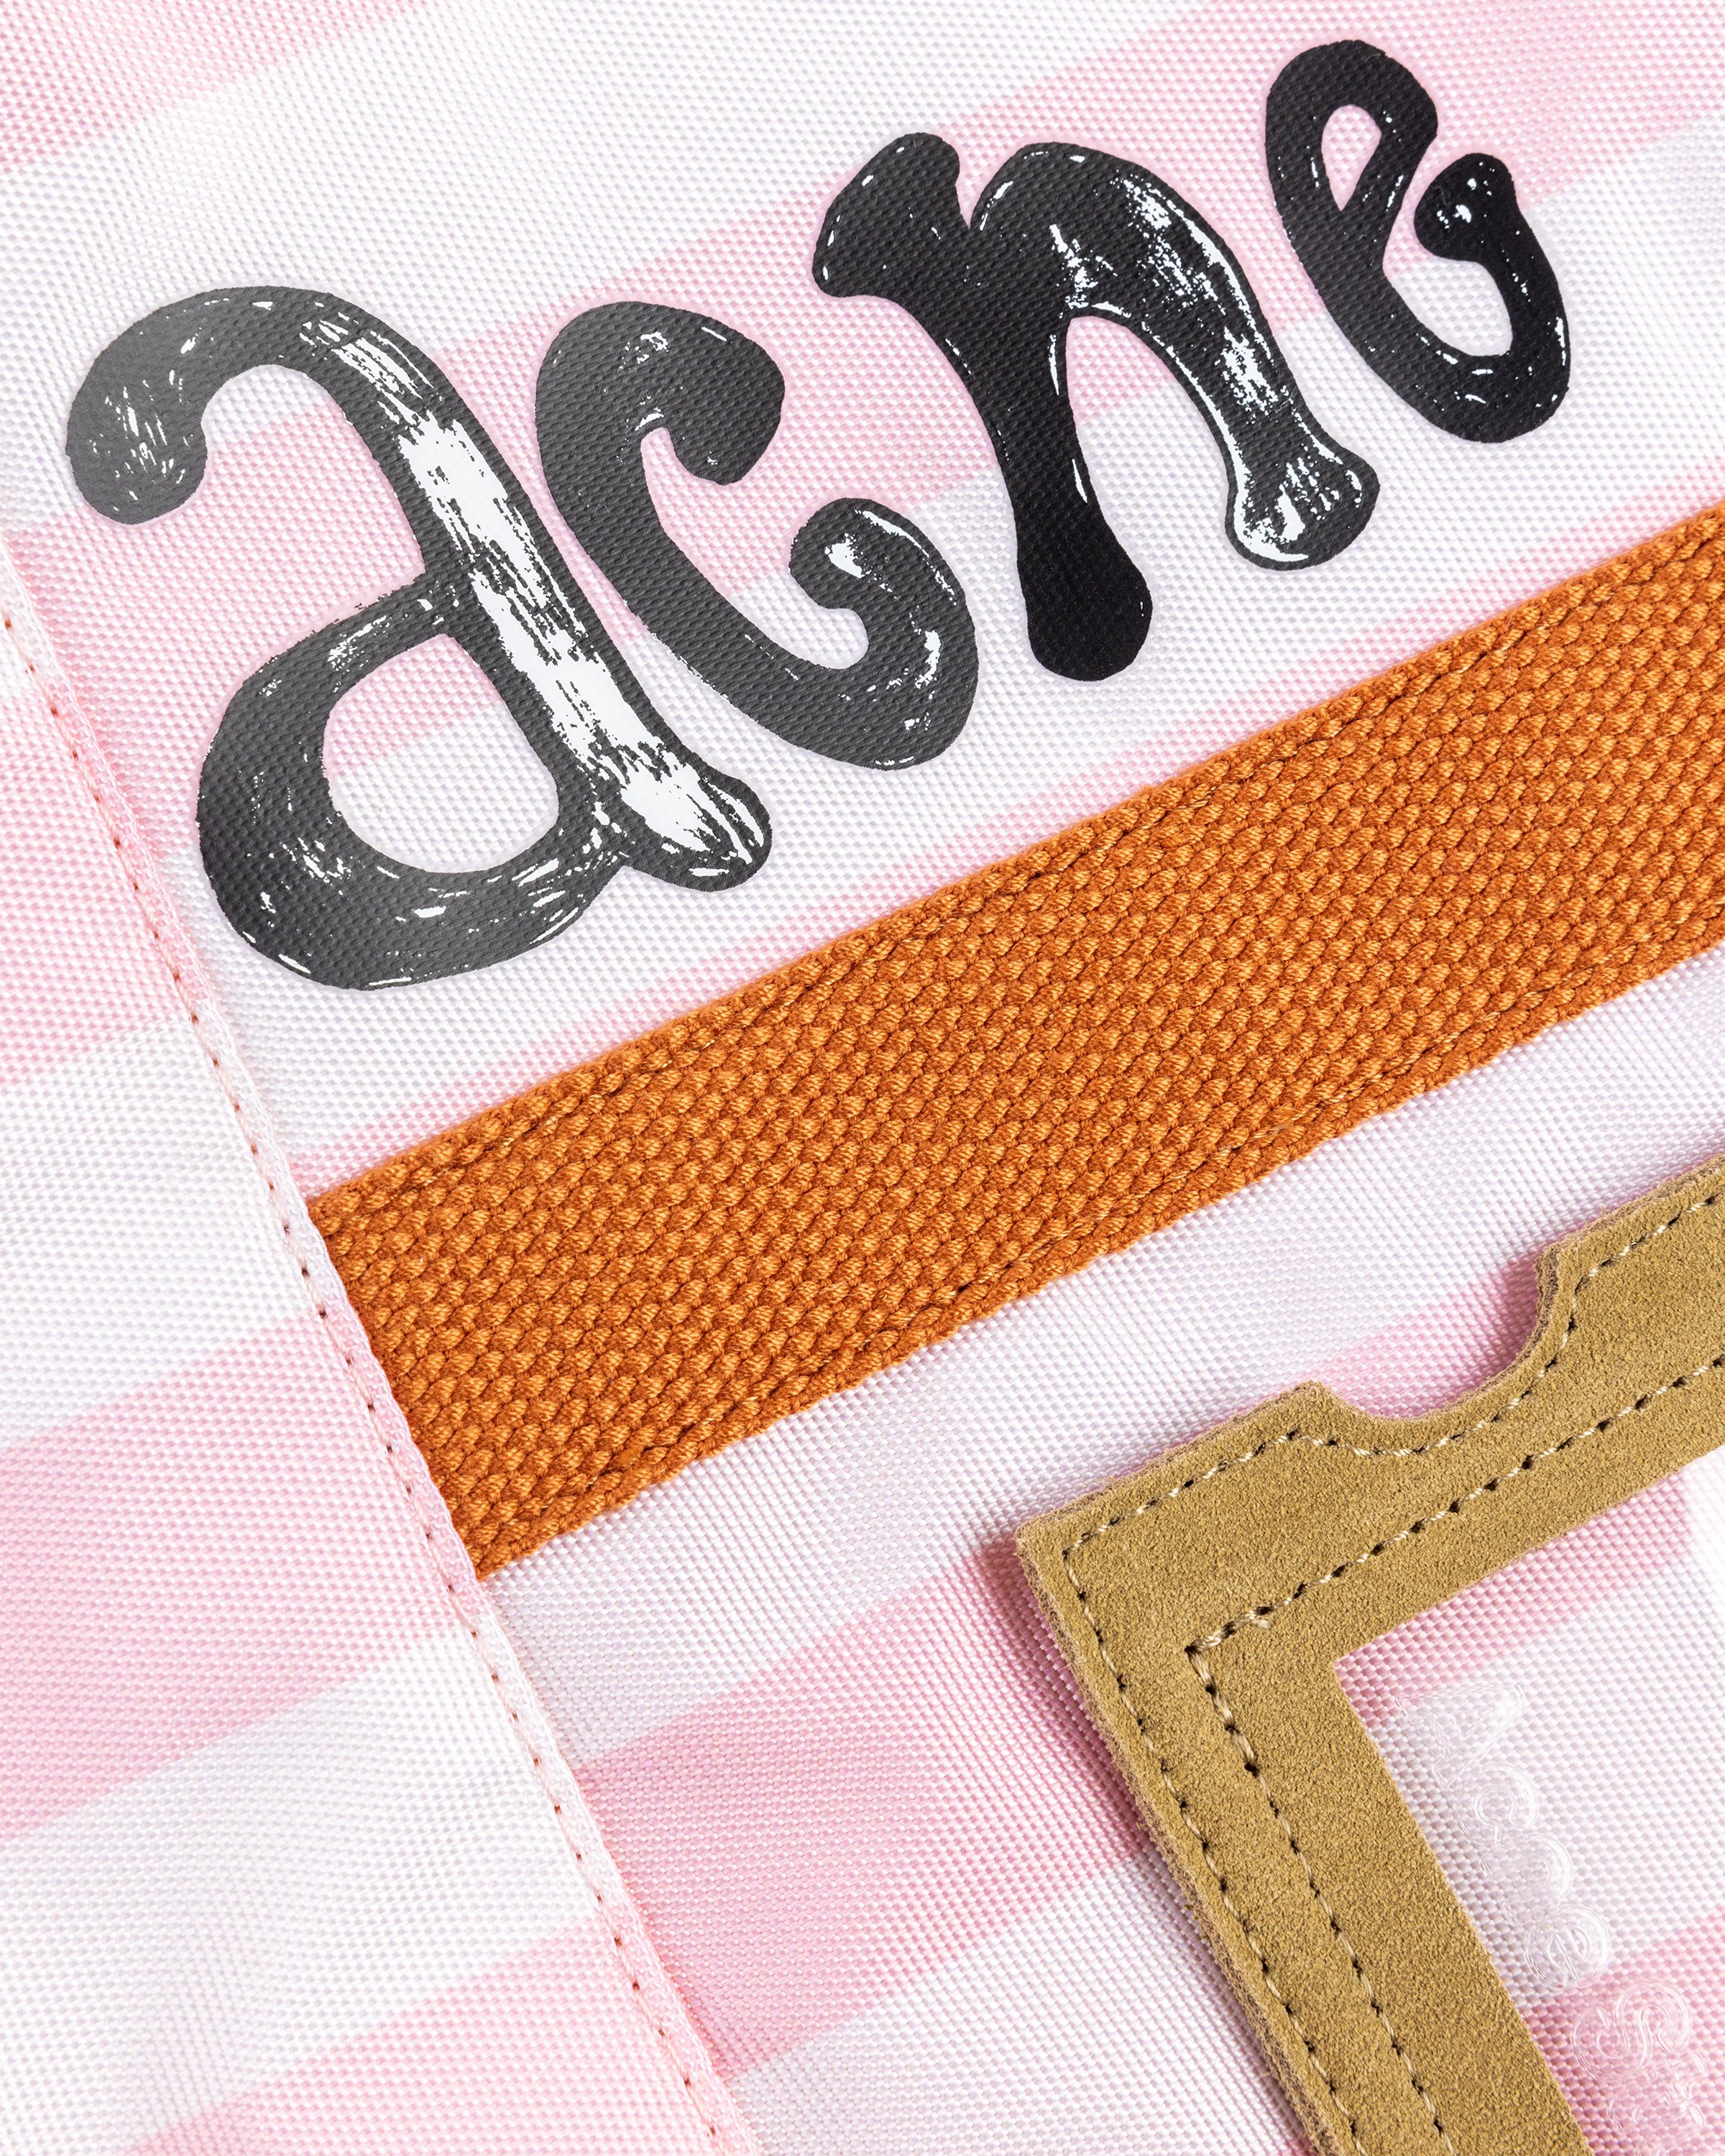 Acne Studios - FN-UX-BAGS000153 Light Pink/ Off White - Accessories - Pink - Image 7